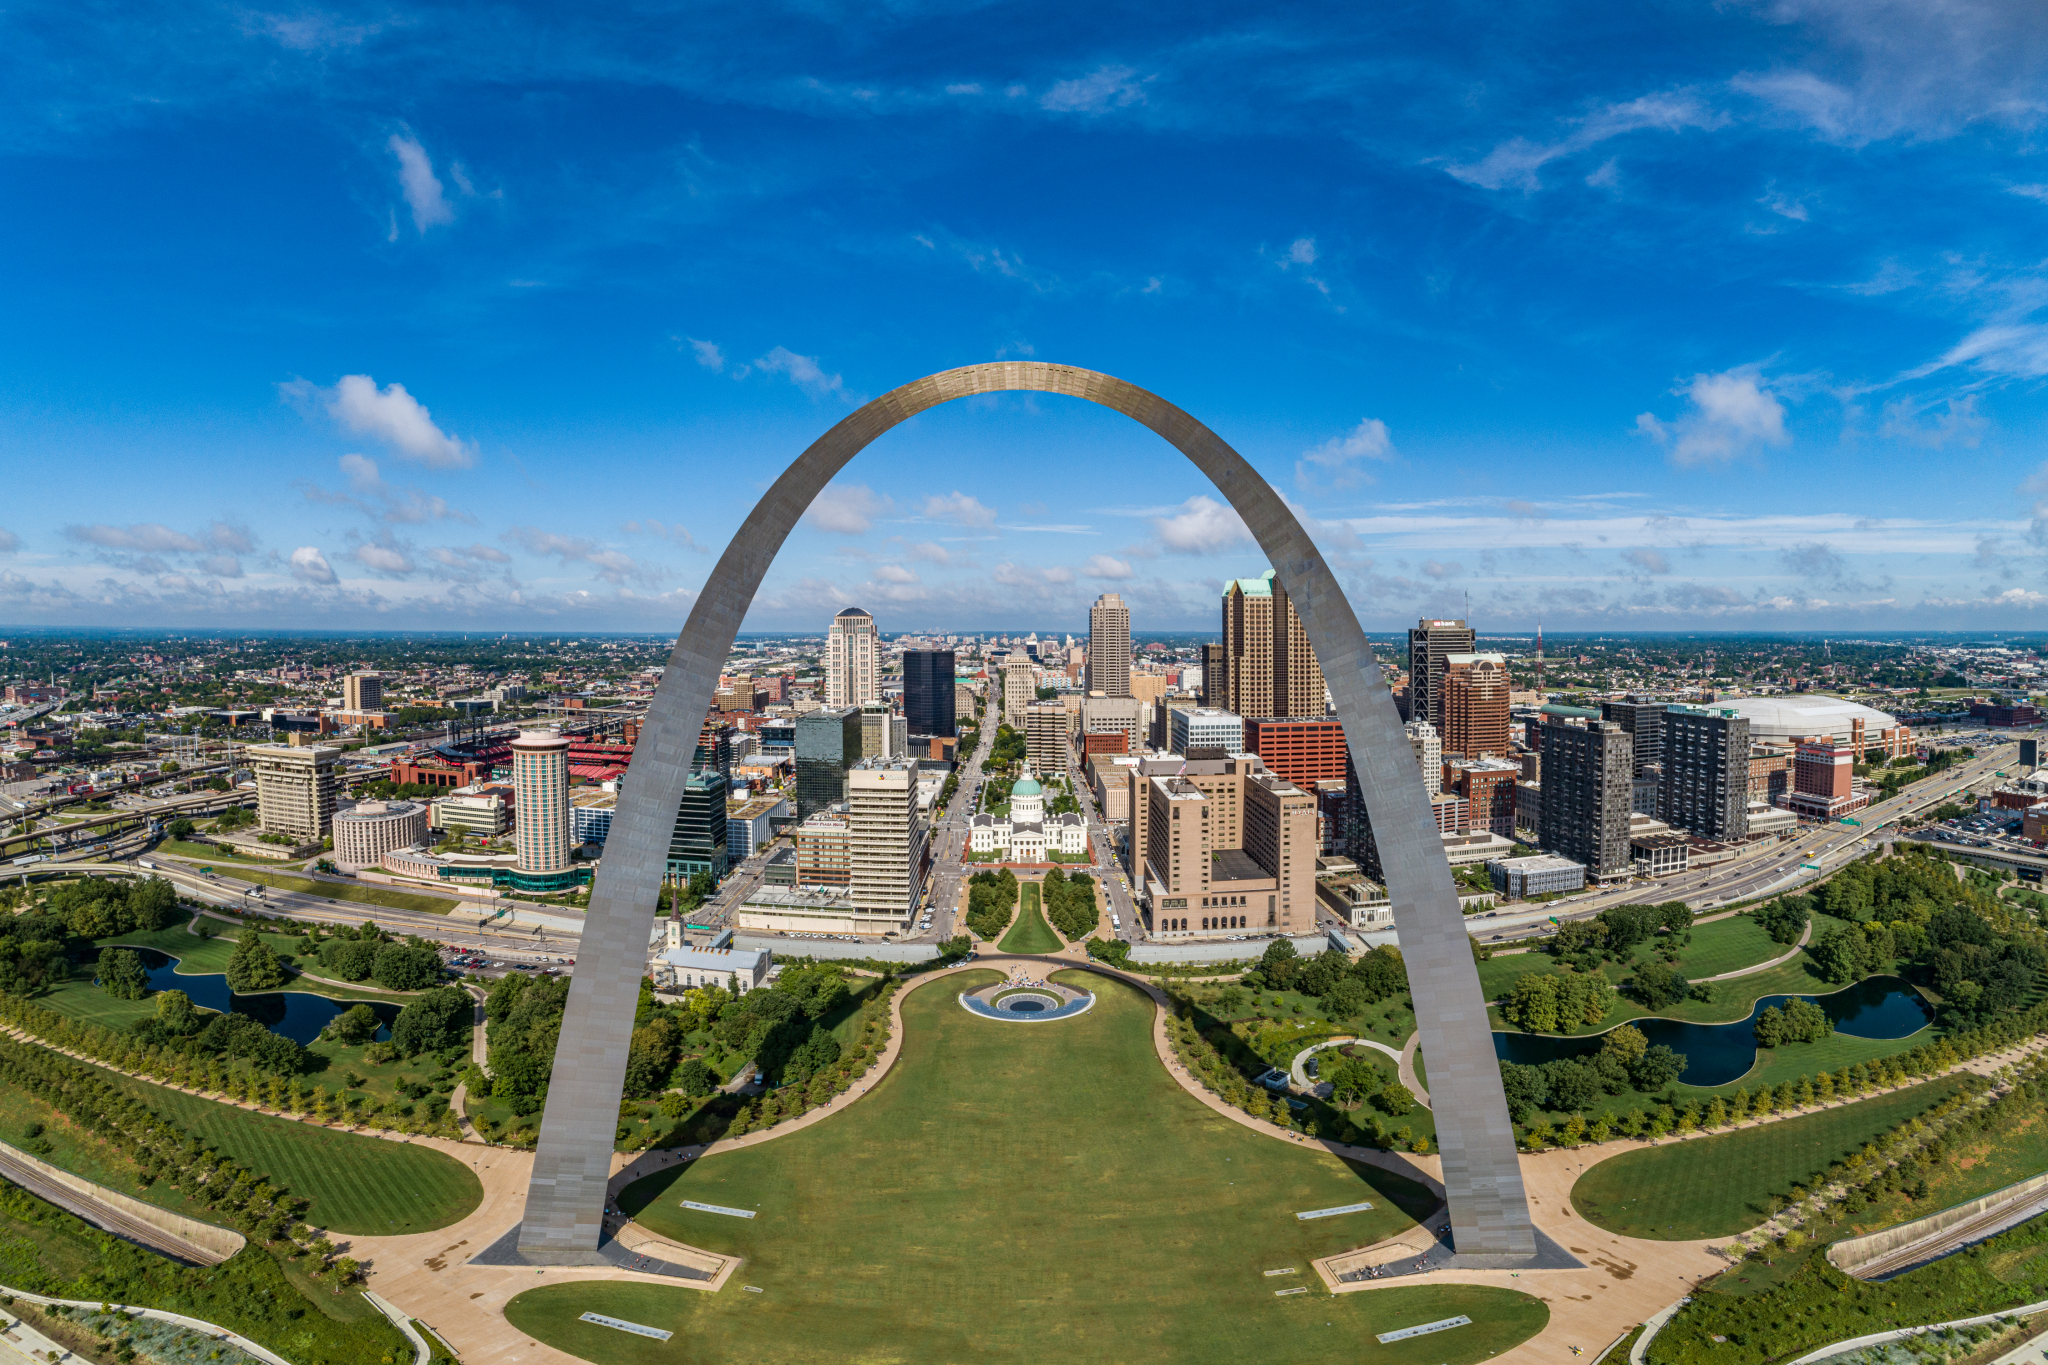 Aerial image of Gateway Arch National Park looking west into downtown St. Louis on a sunny day with a bright blue sky.